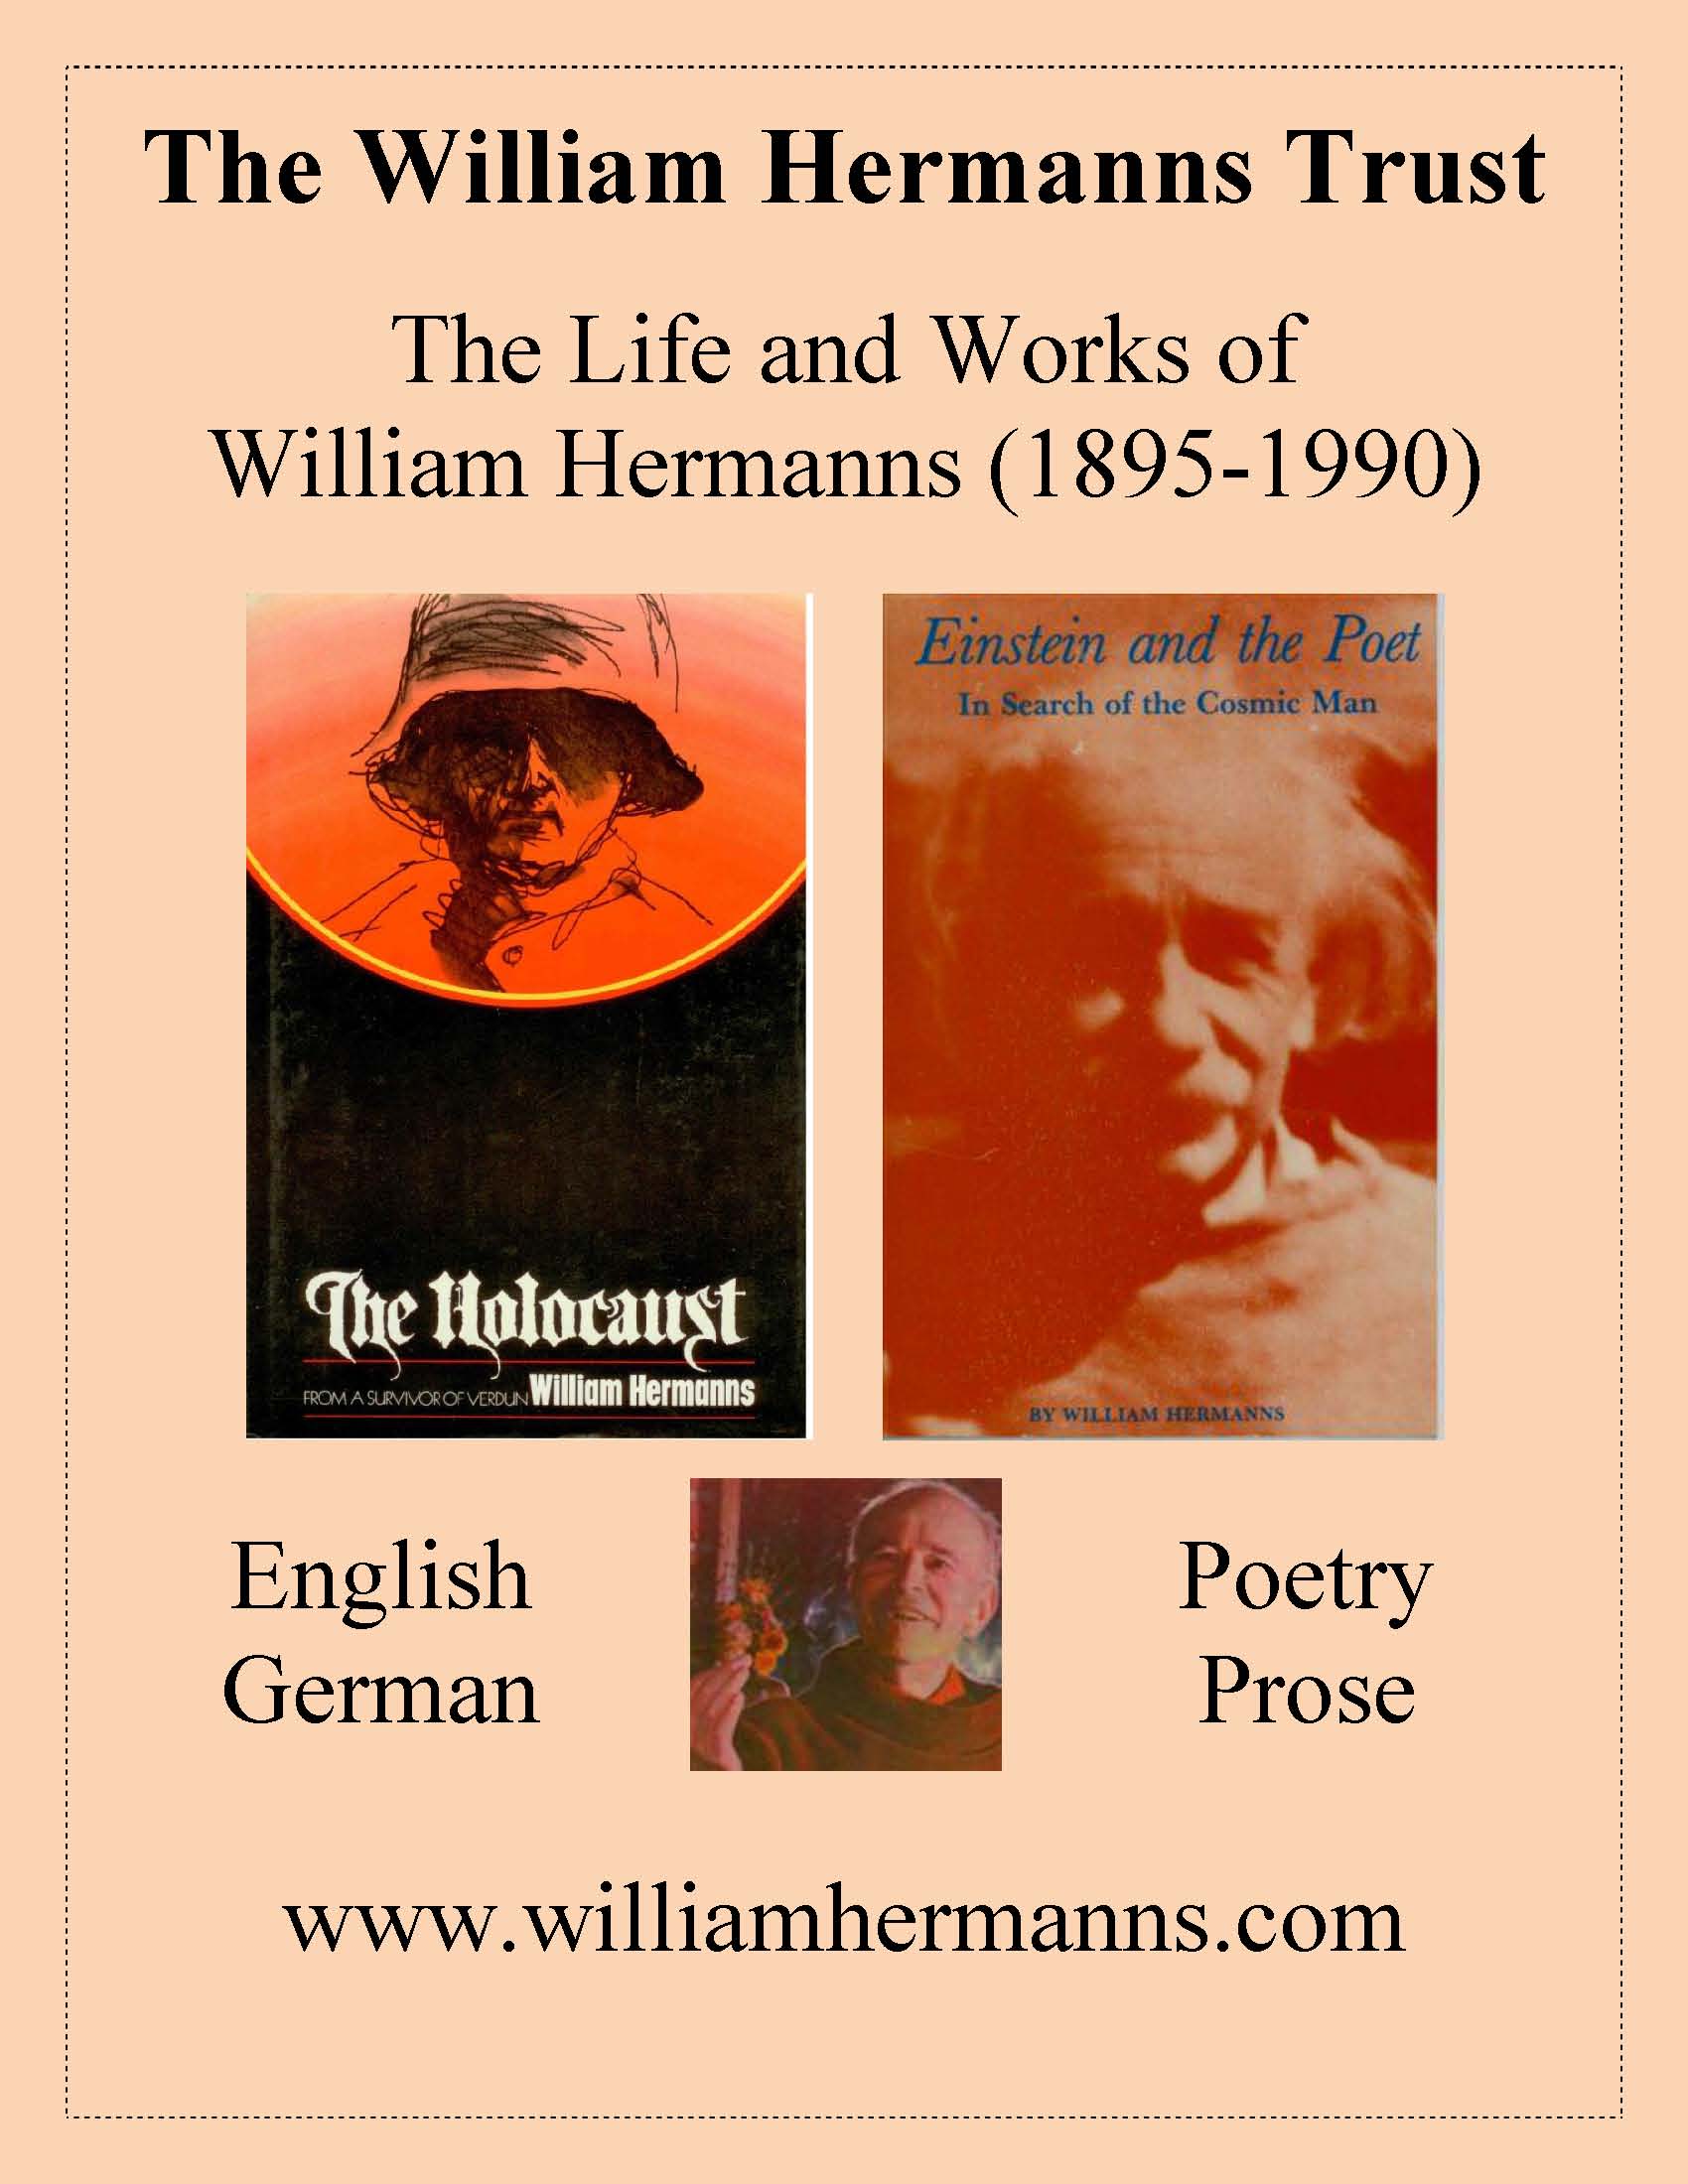 William Hermanns - Author Poet - Life and Works website